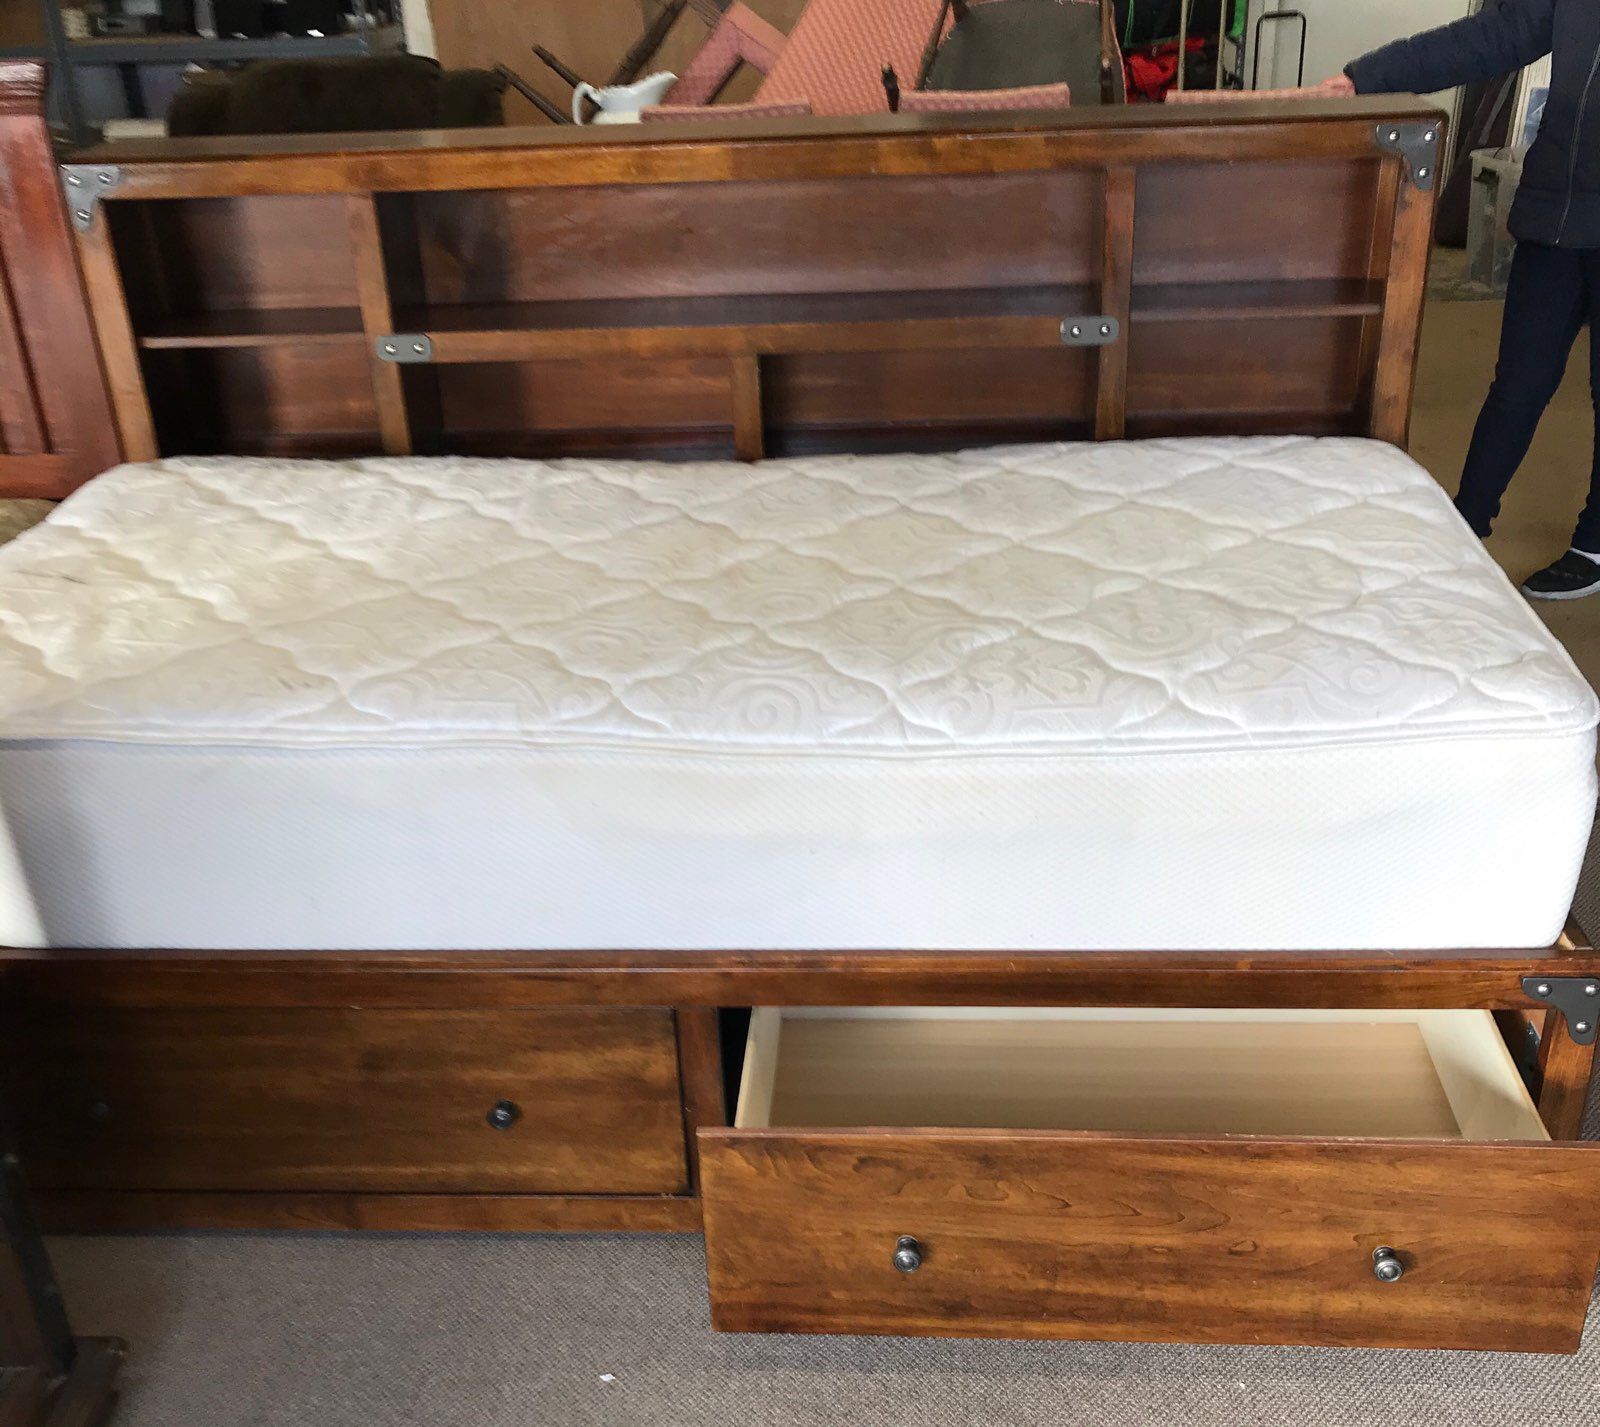 Twin With double mattress Bed Frame With Drawers -$189.00 For All